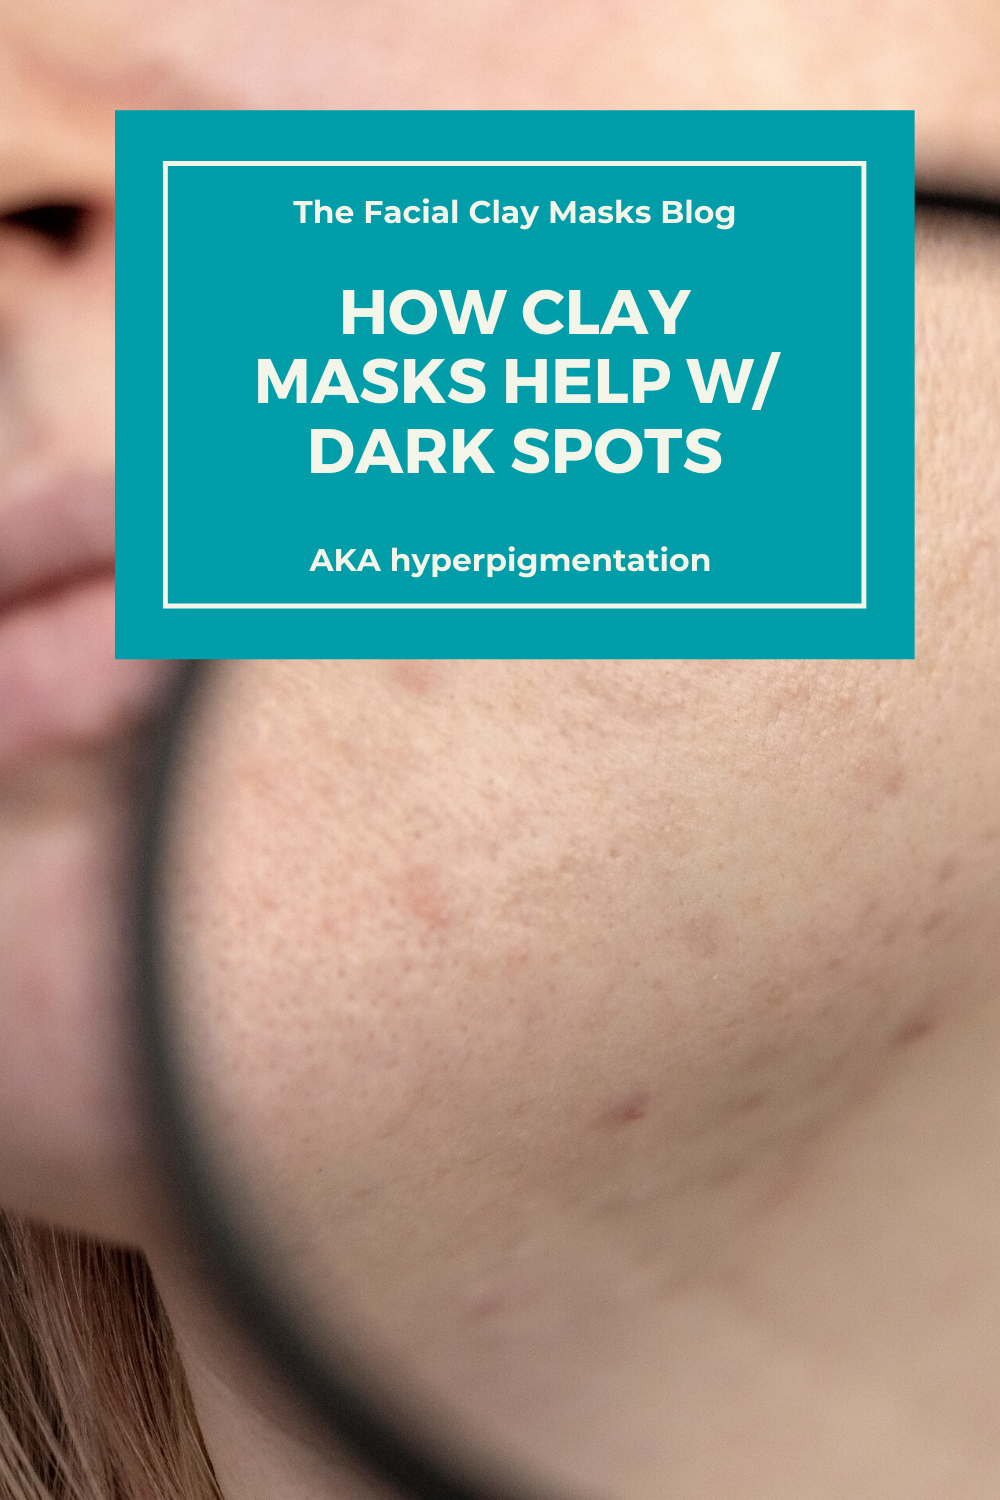 Are Clay Masks good for Dark Spots? 1